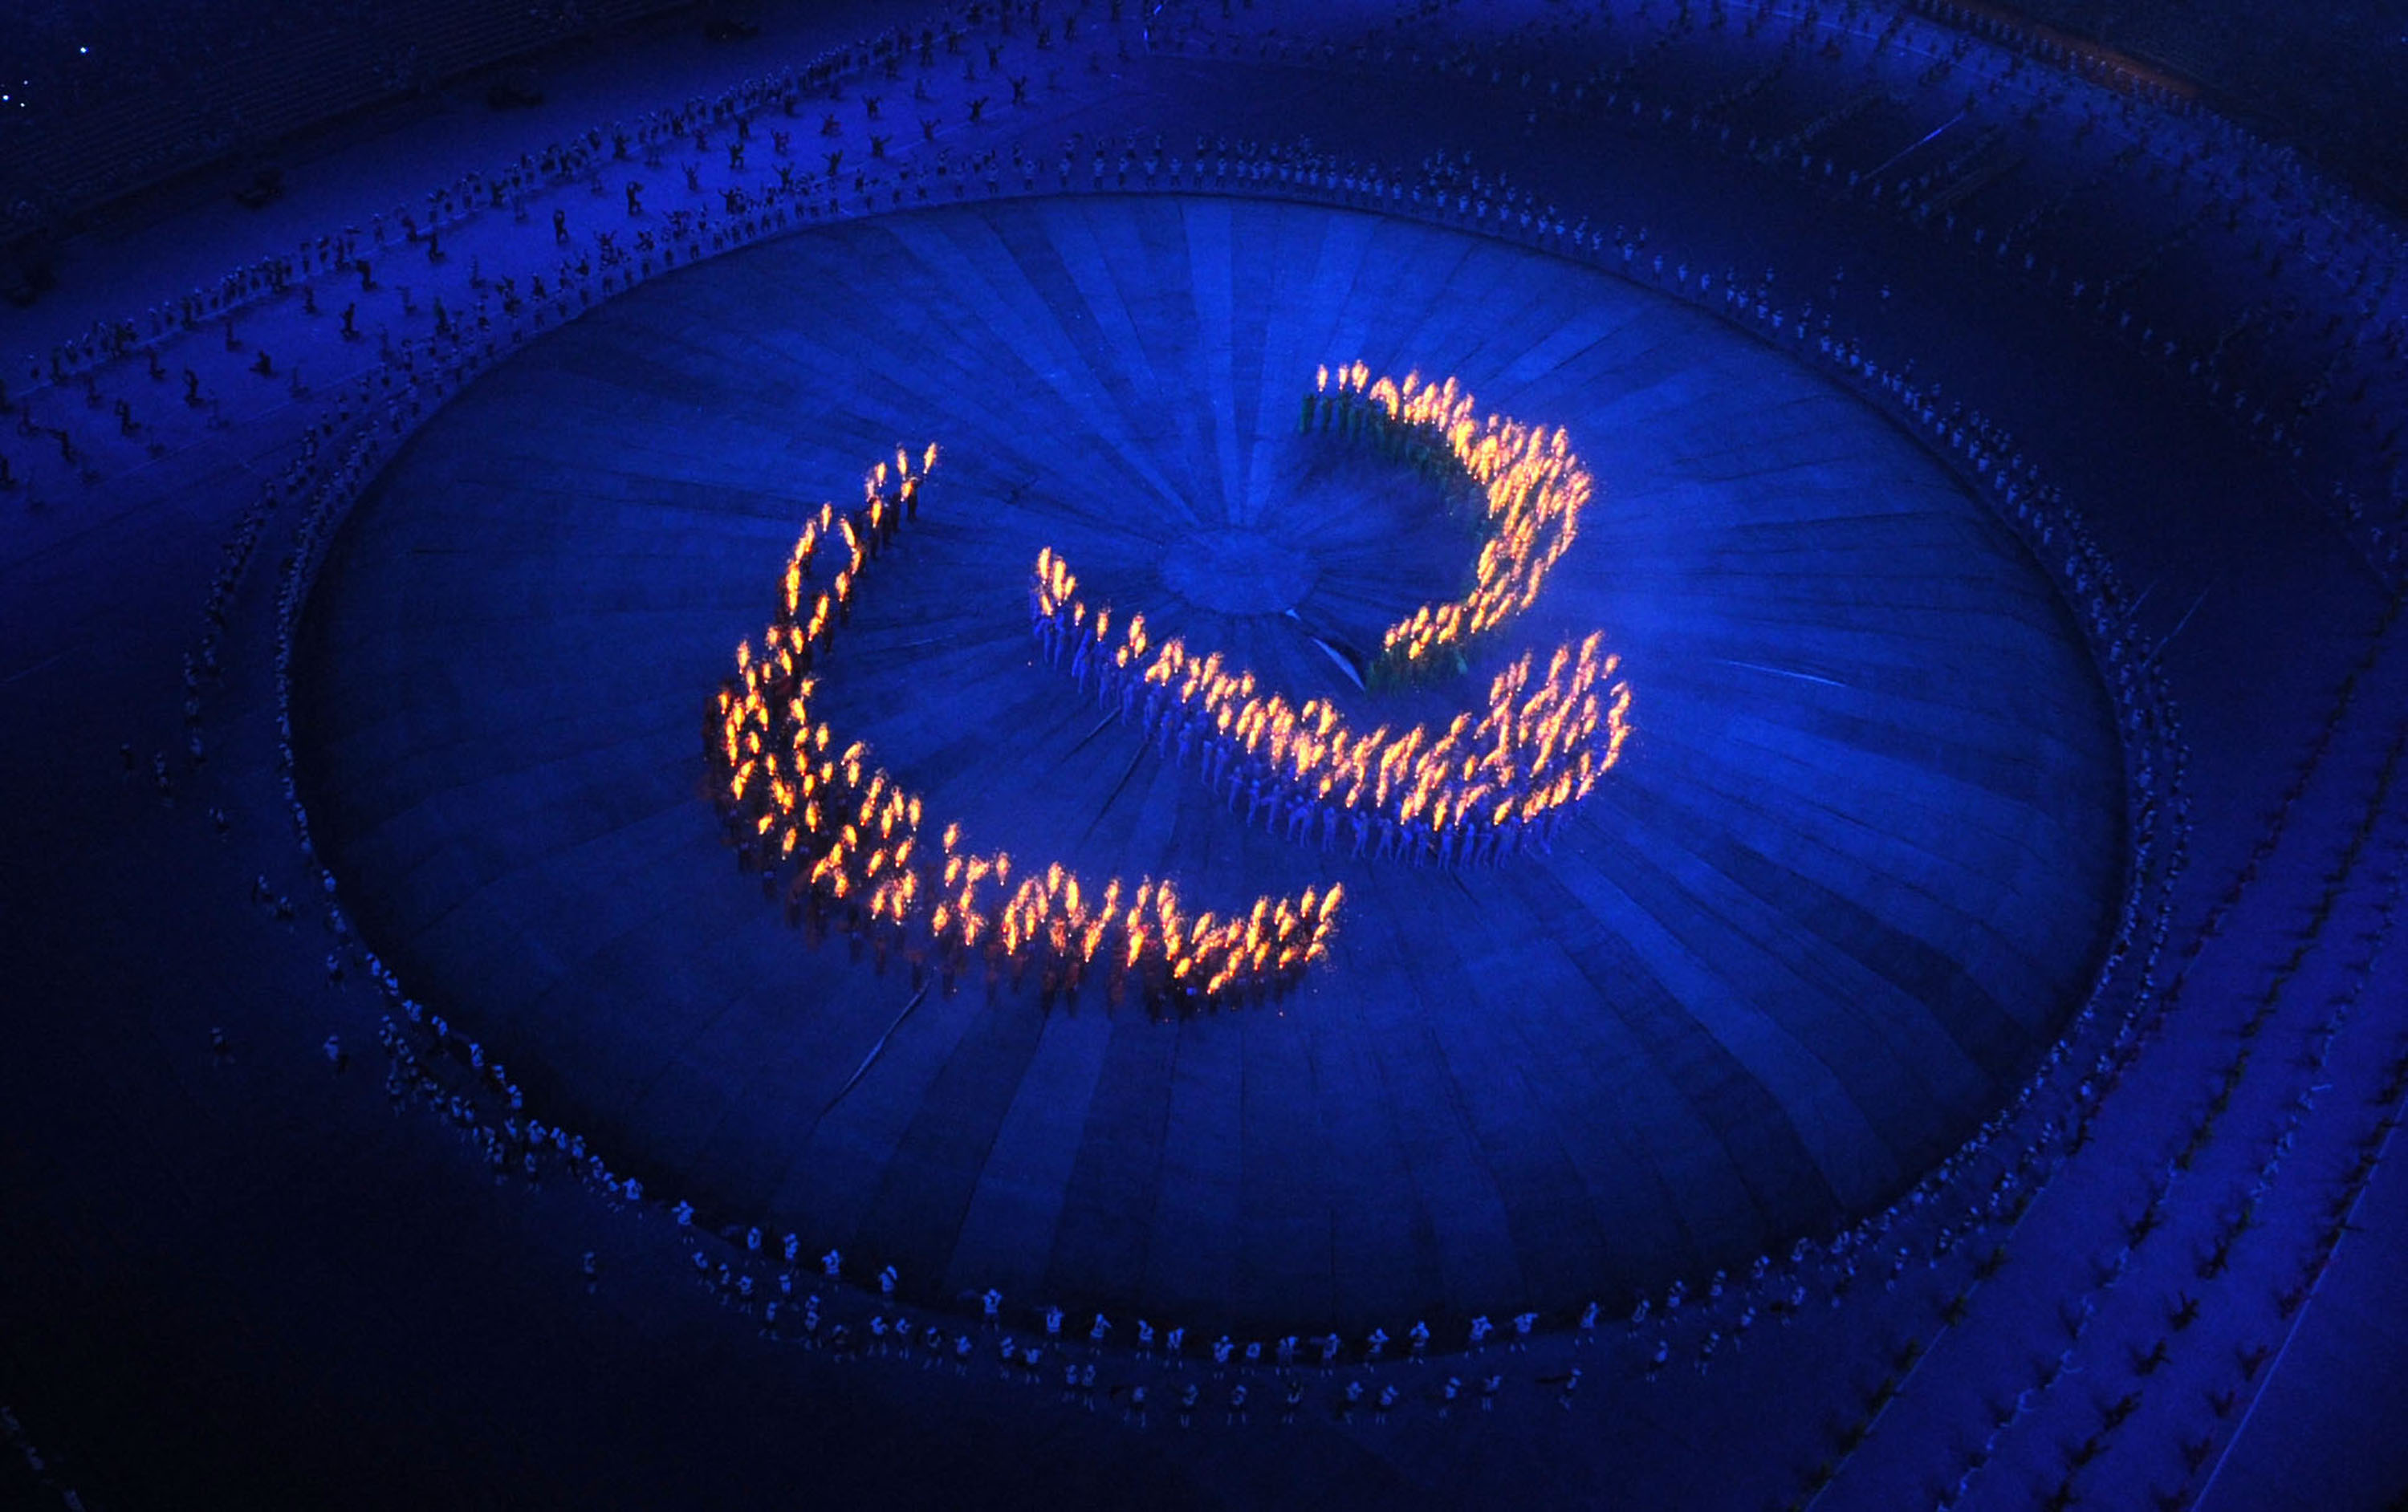 Agitos representation during the Beijing Opening Ceremony